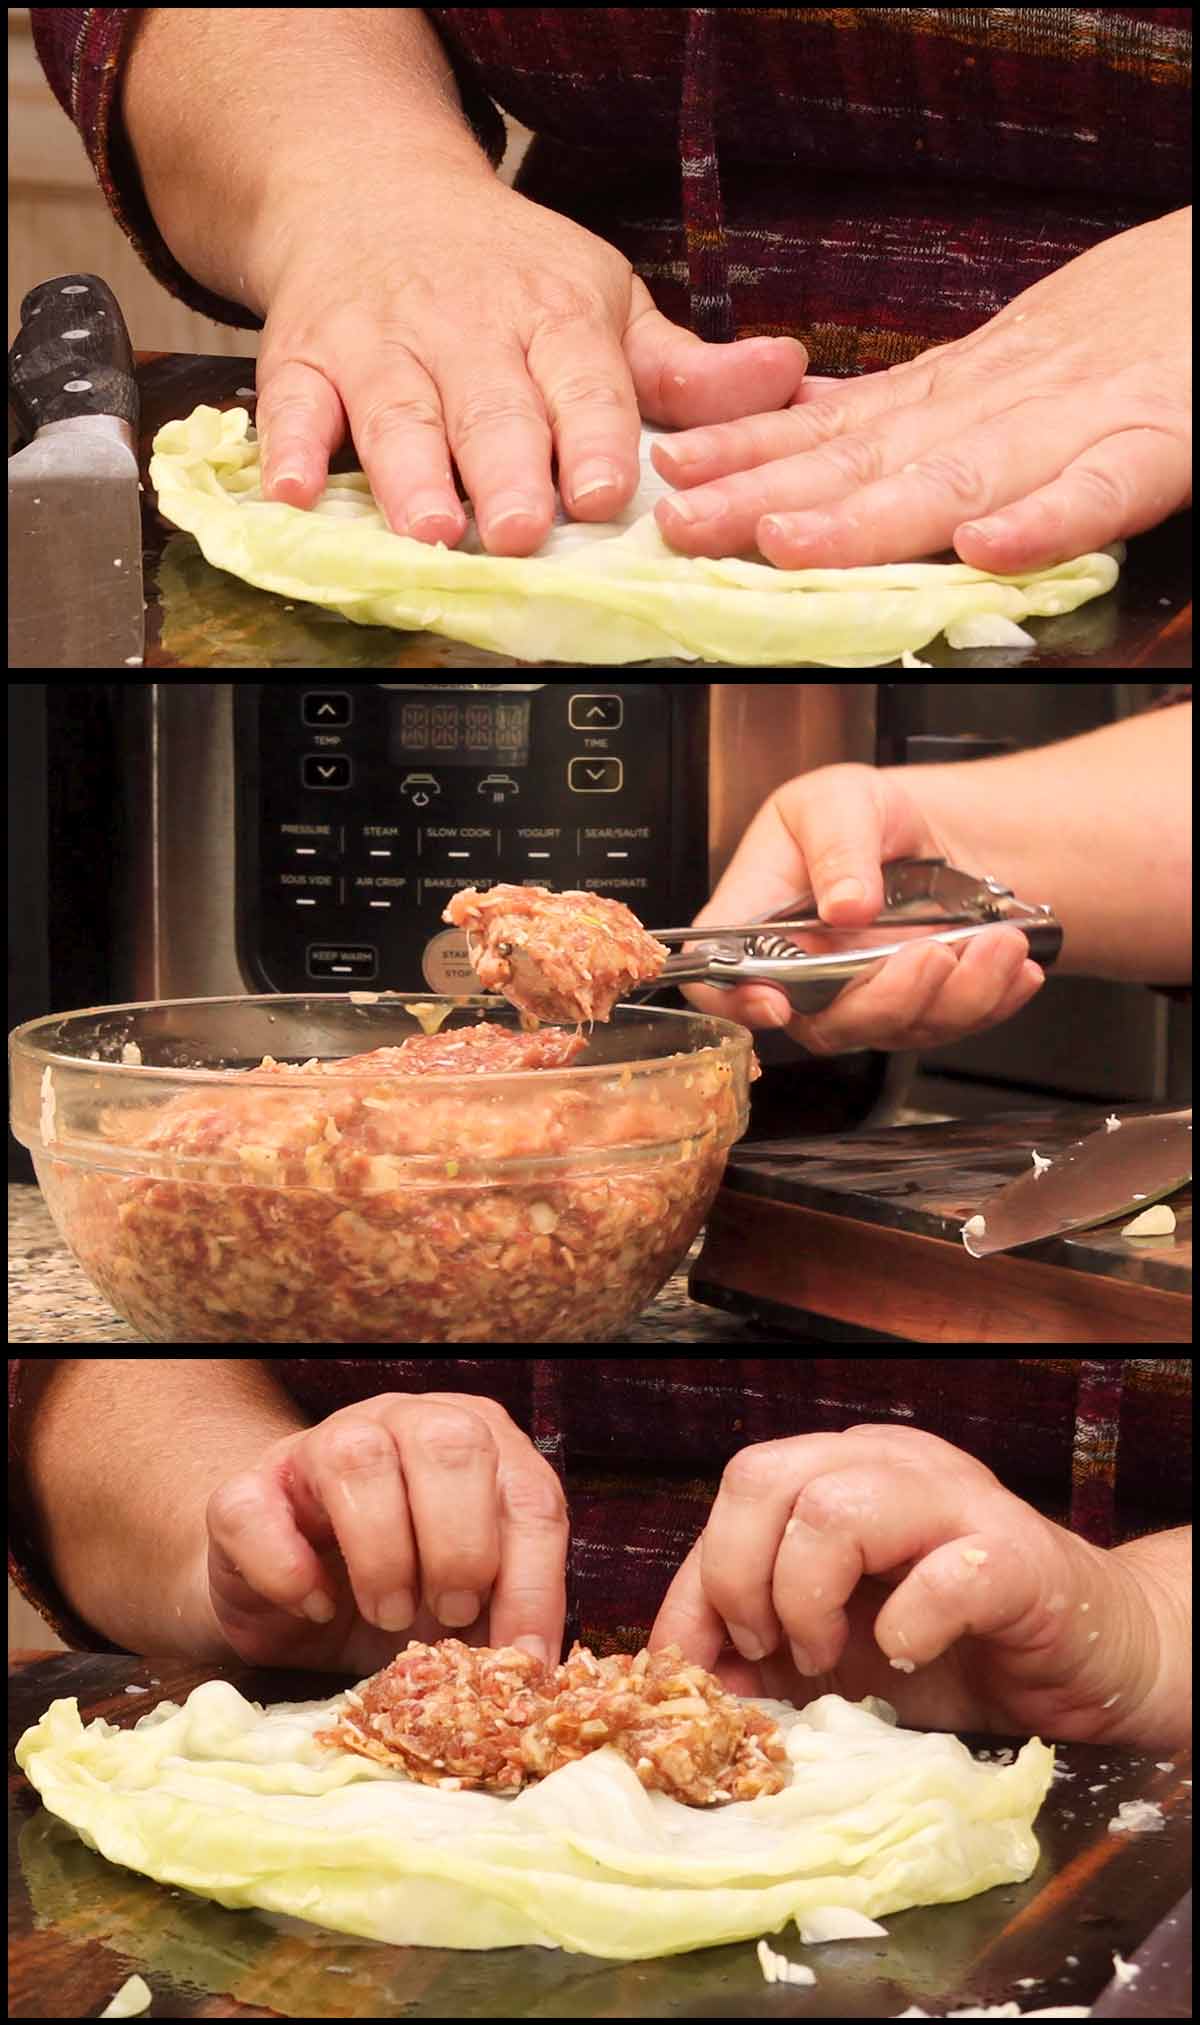 stuffing the cabbage leaf with meat mixture